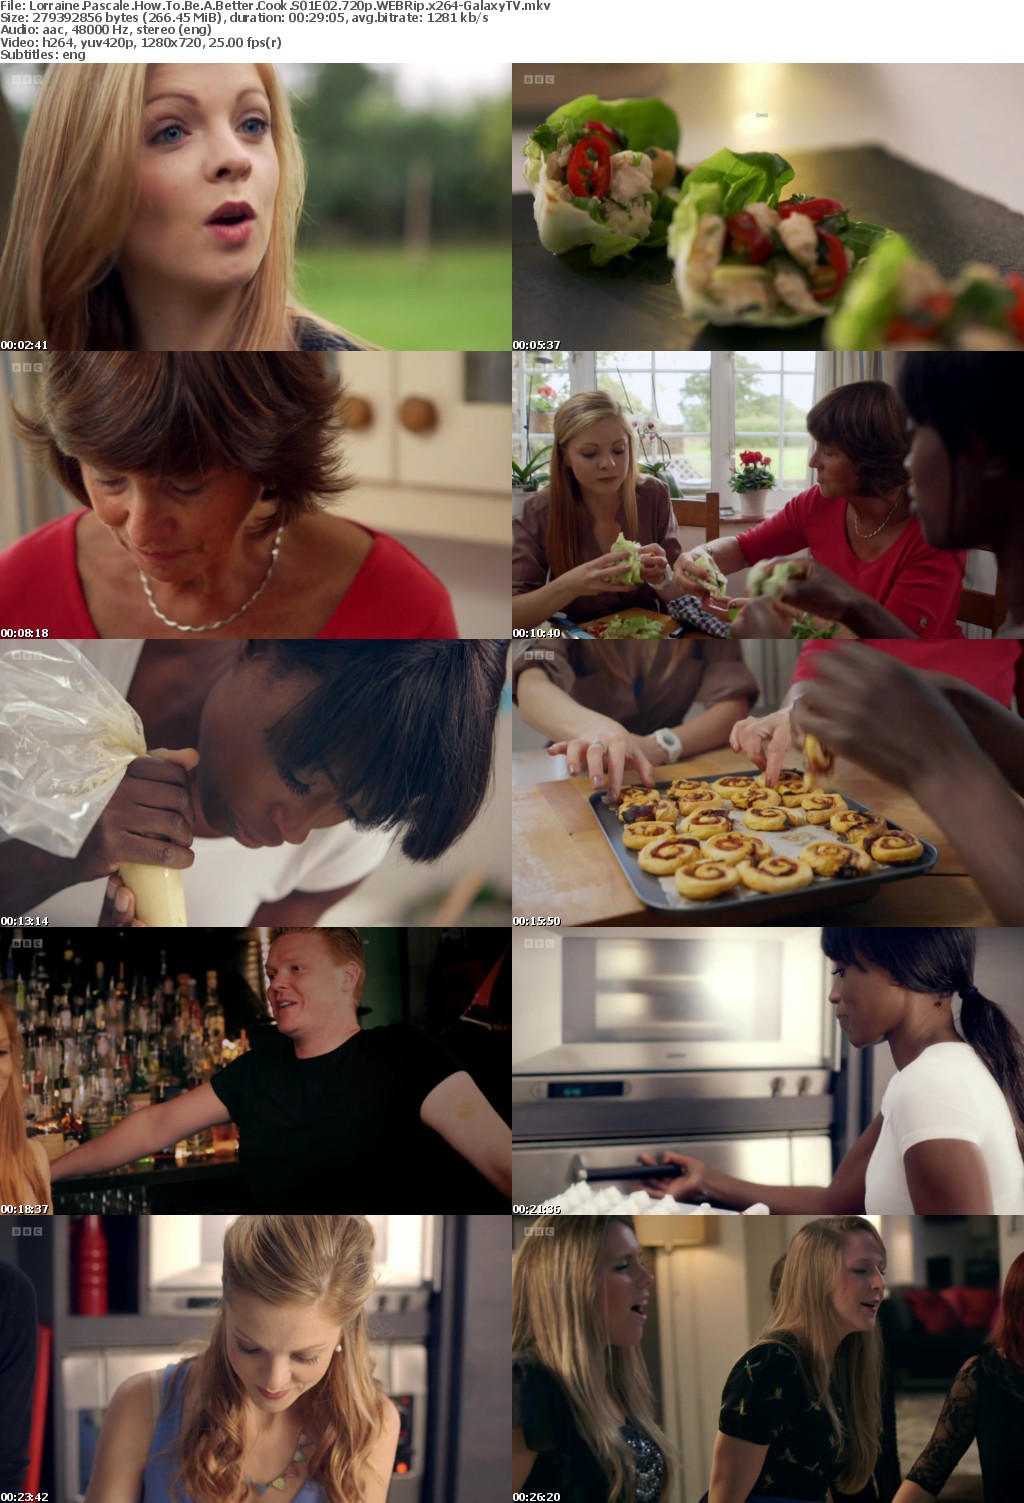 Lorraine Pascale How To Be A Better Cook S01 COMPLETE 720p WEBRip x264-GalaxyTV